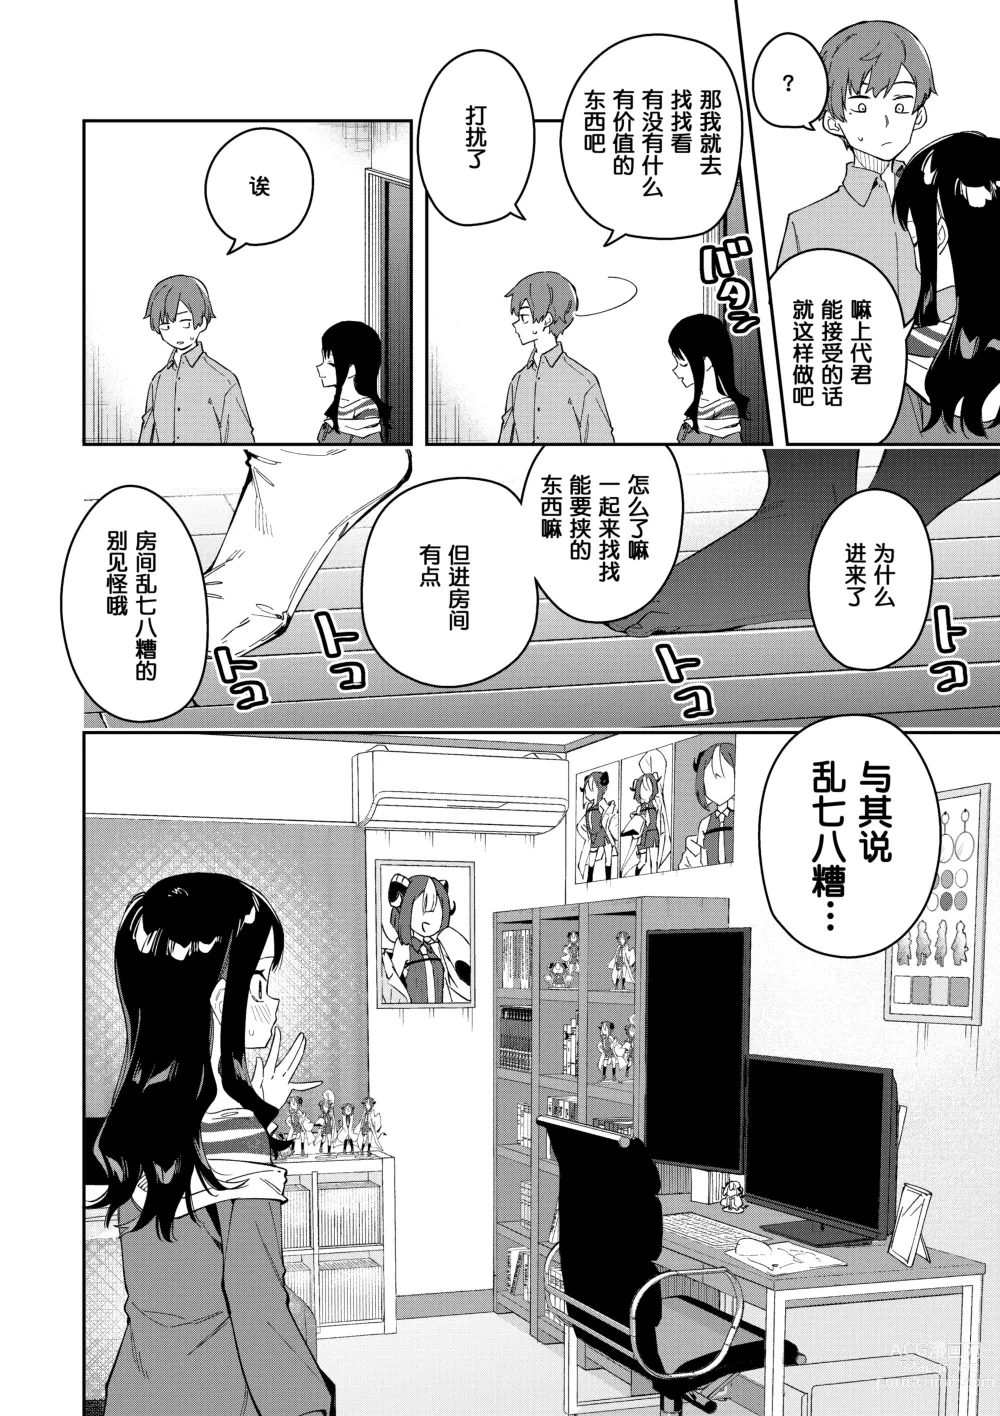 Page 10 of doujinshi 隣人は有名配信者3人目